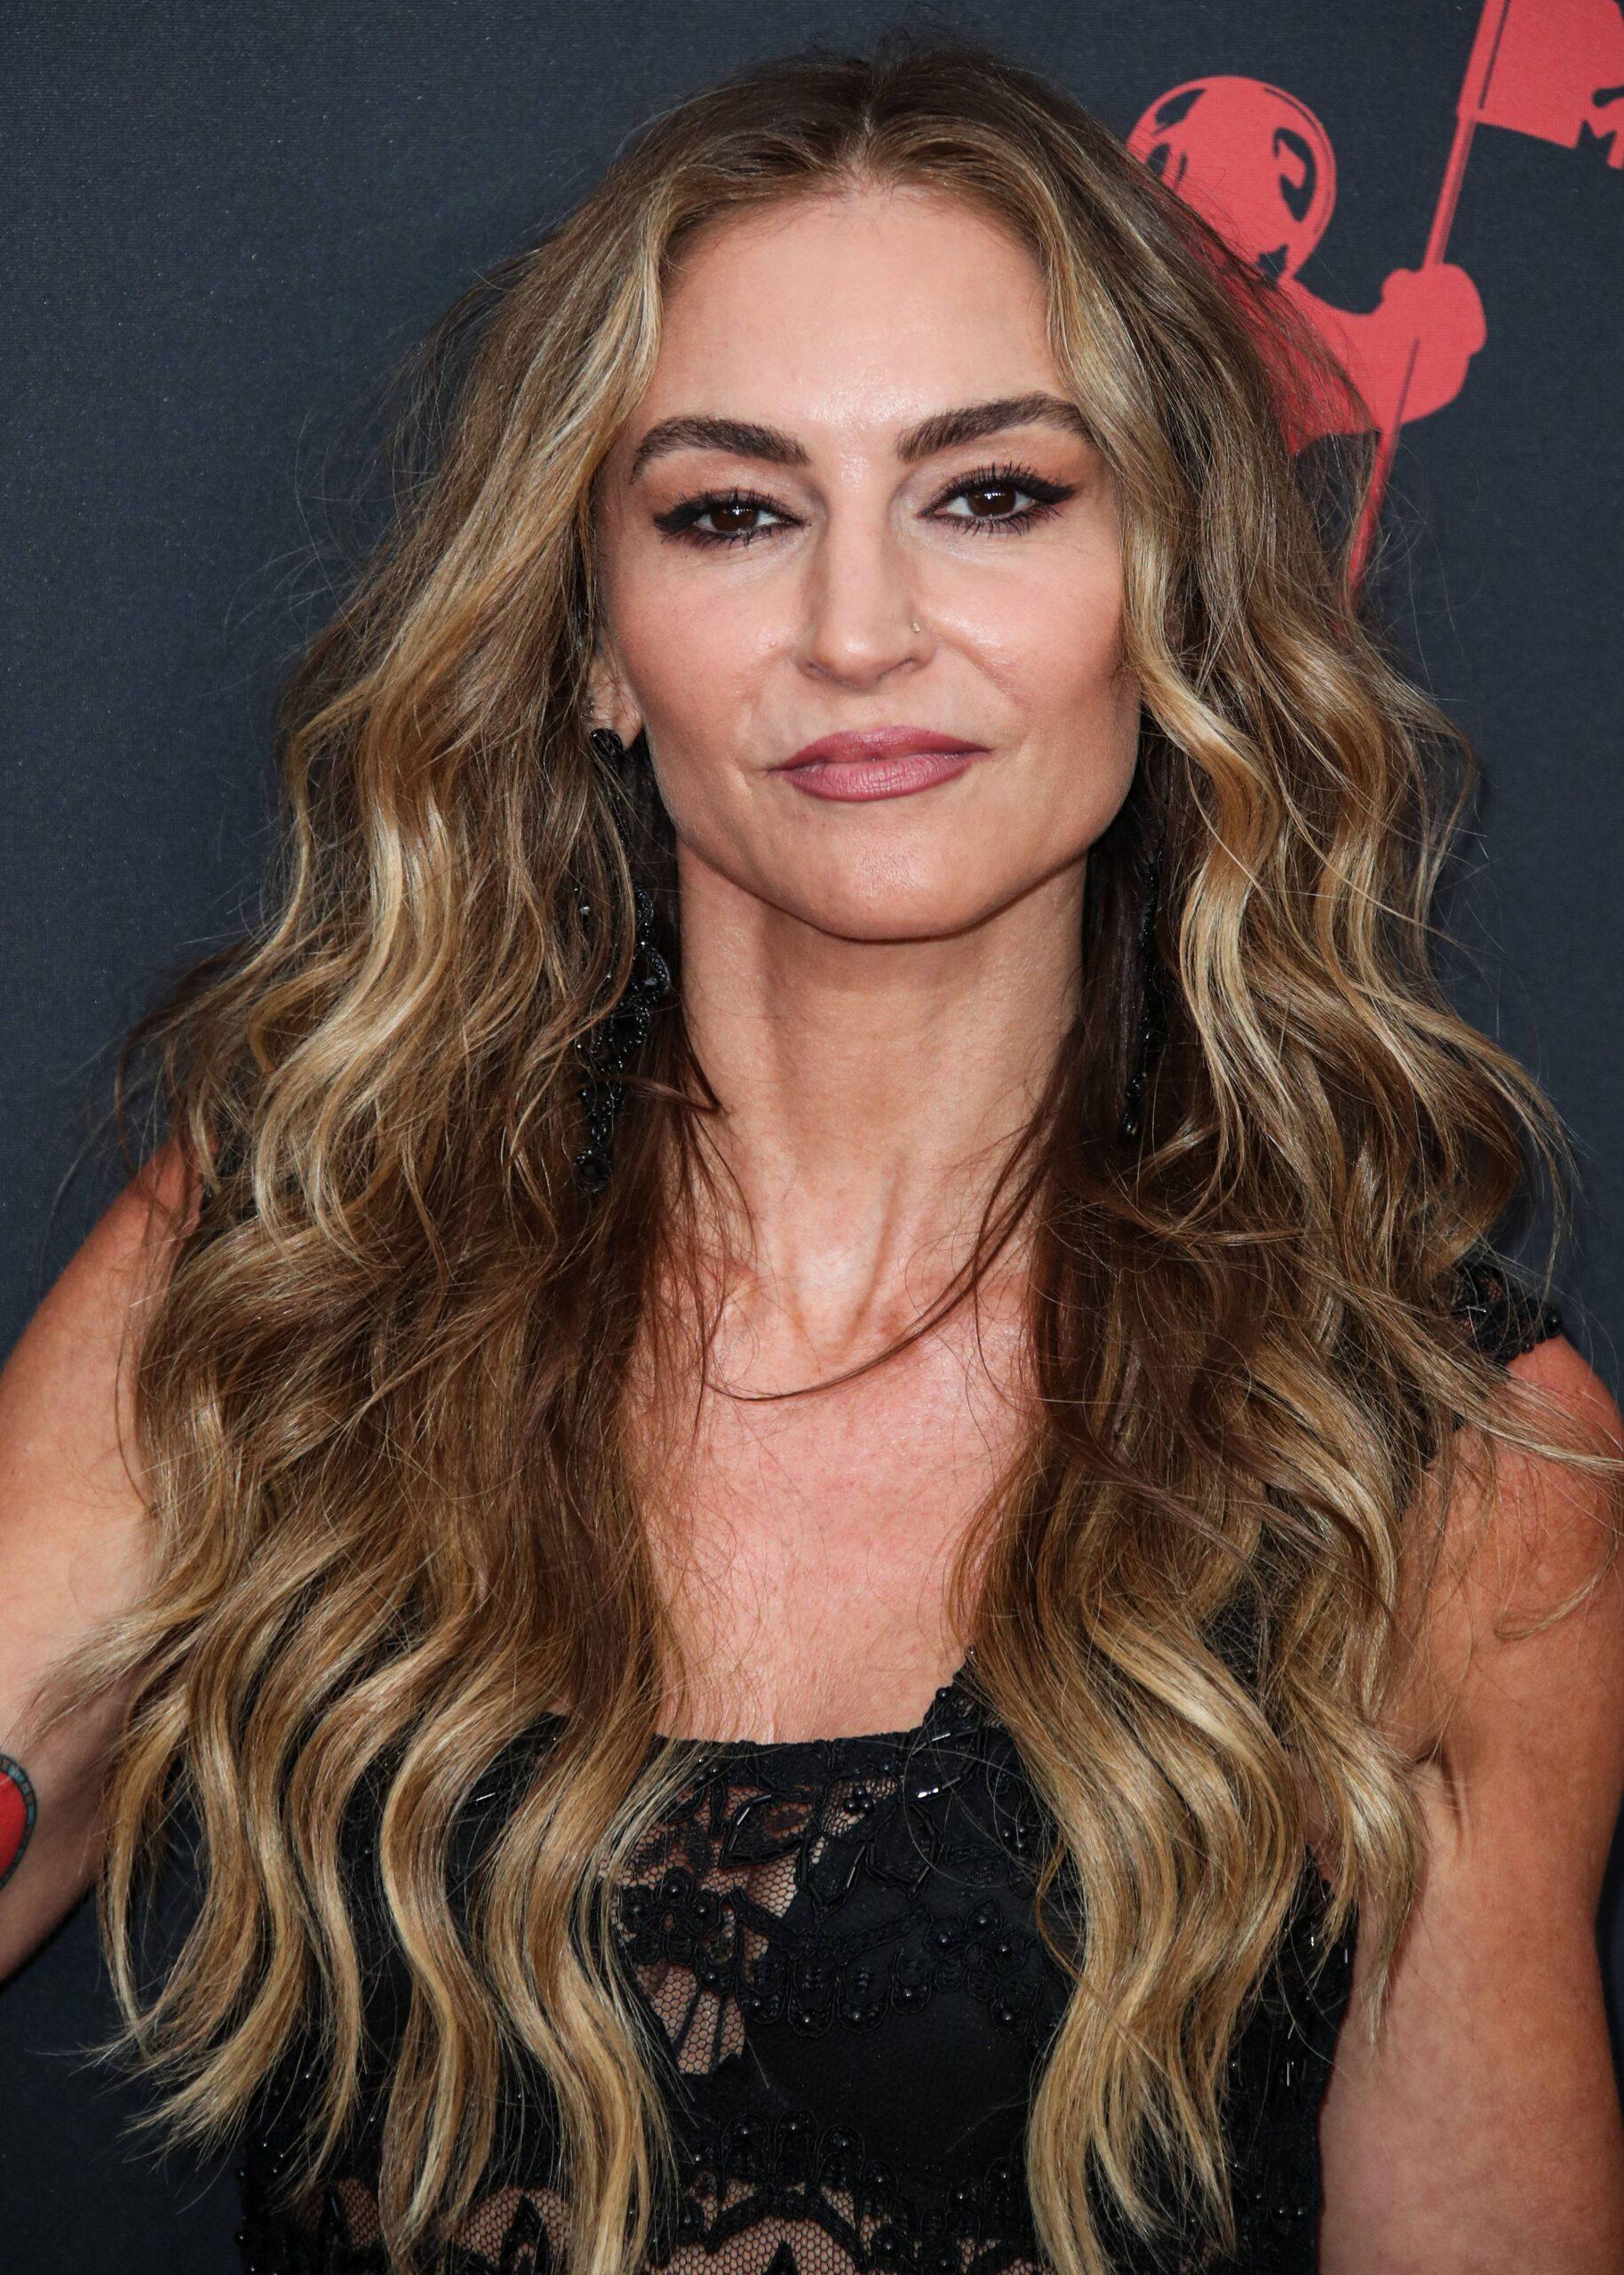 'The Sopranos' Drea de Matteo Opens Up About Launching An OF Account At 51